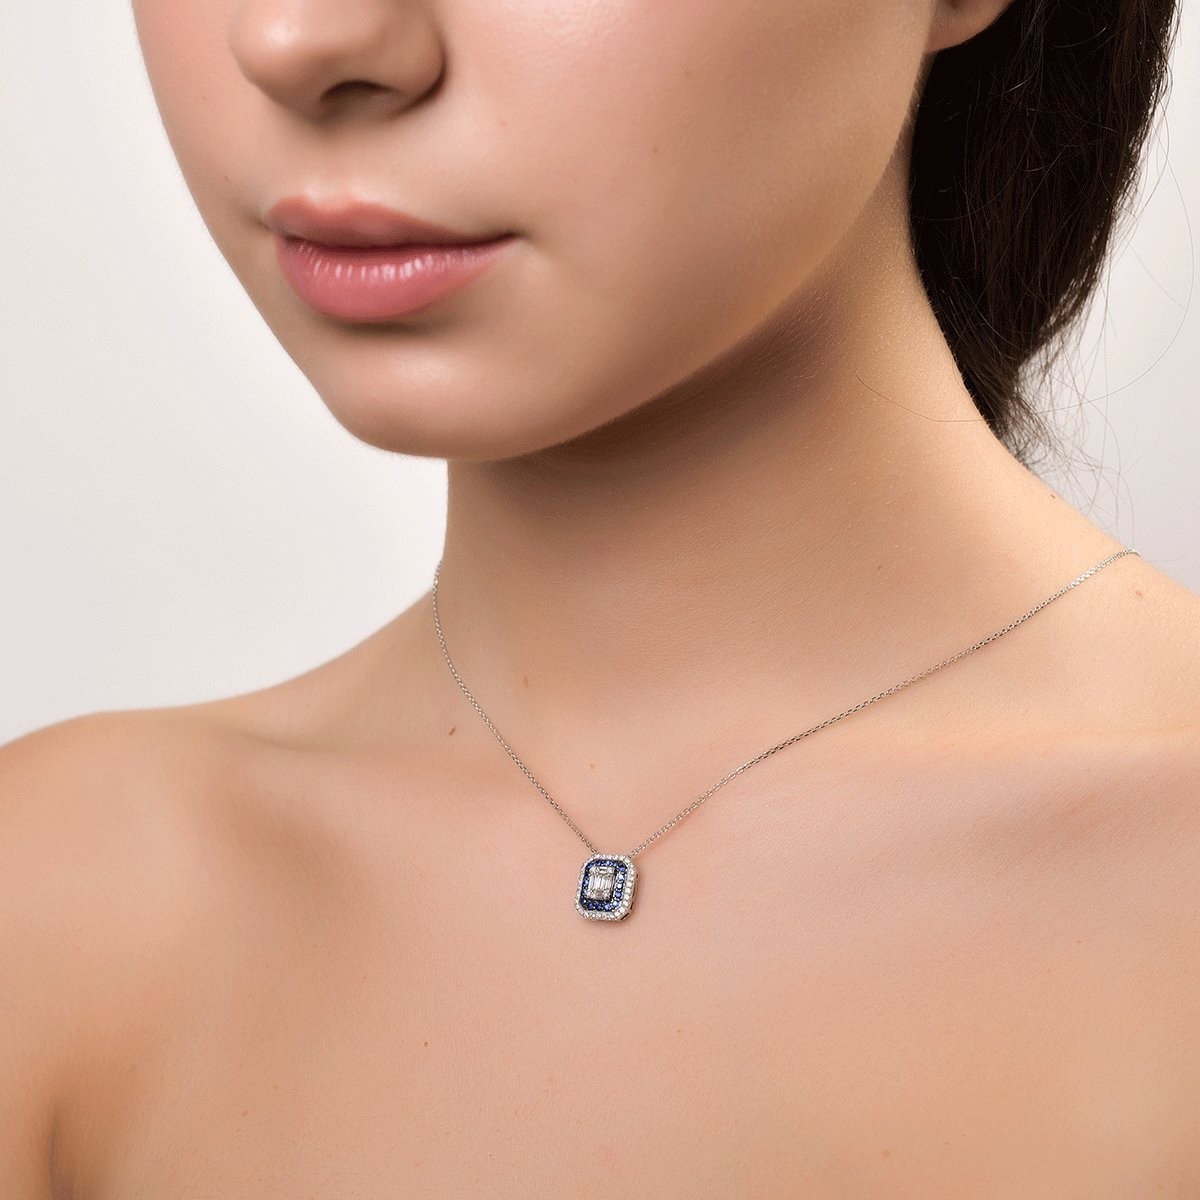 18K white gold pendant necklace with 0.74ct diamonds and 0.222ct sapphires